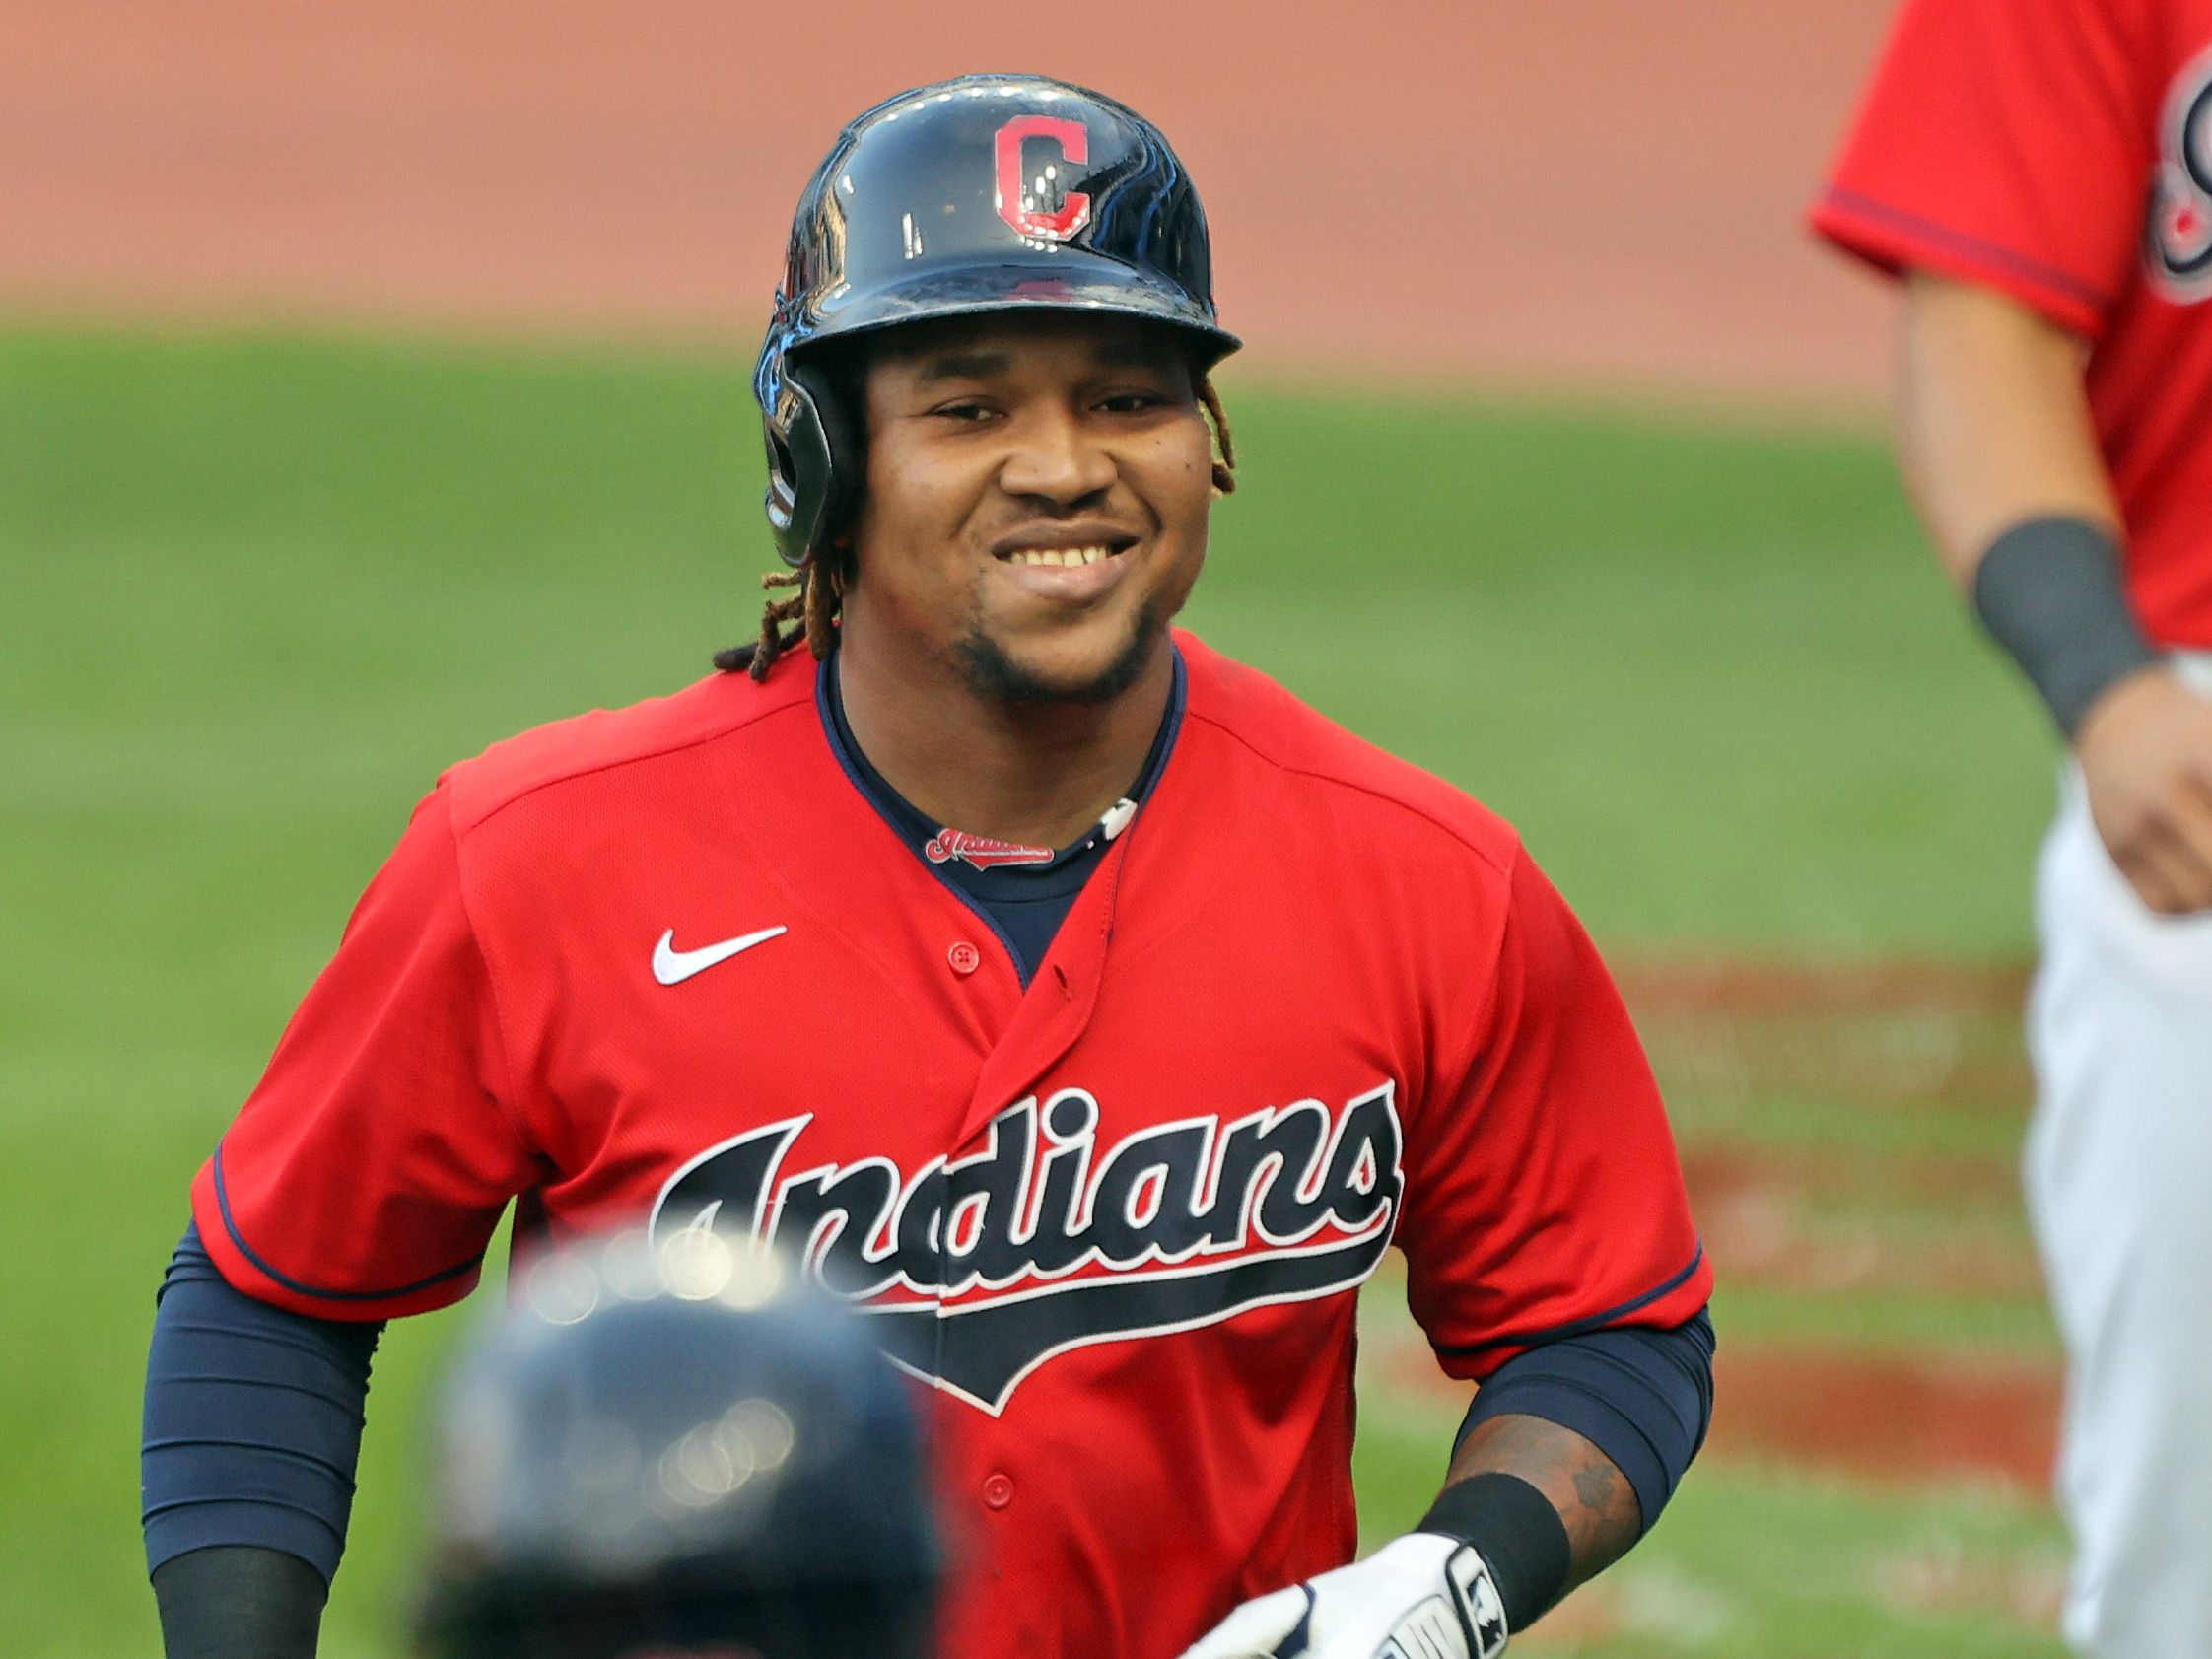 The midges returned to Cleveland, and they may have caused Carlos